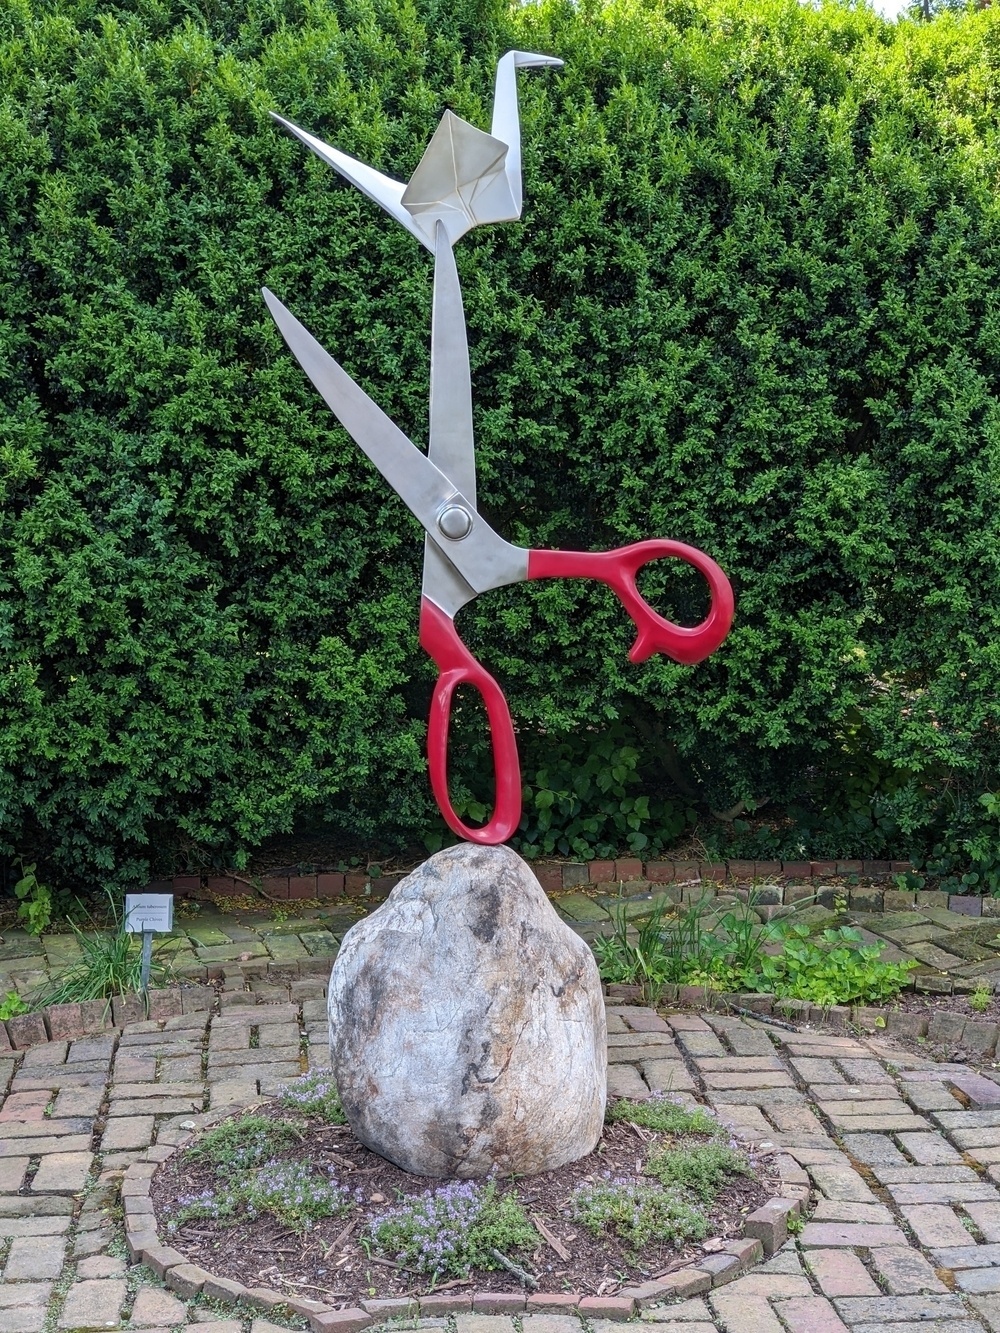 a sculpture of a paper origami crane balanced on a pair of scissors balancing on top of a rock